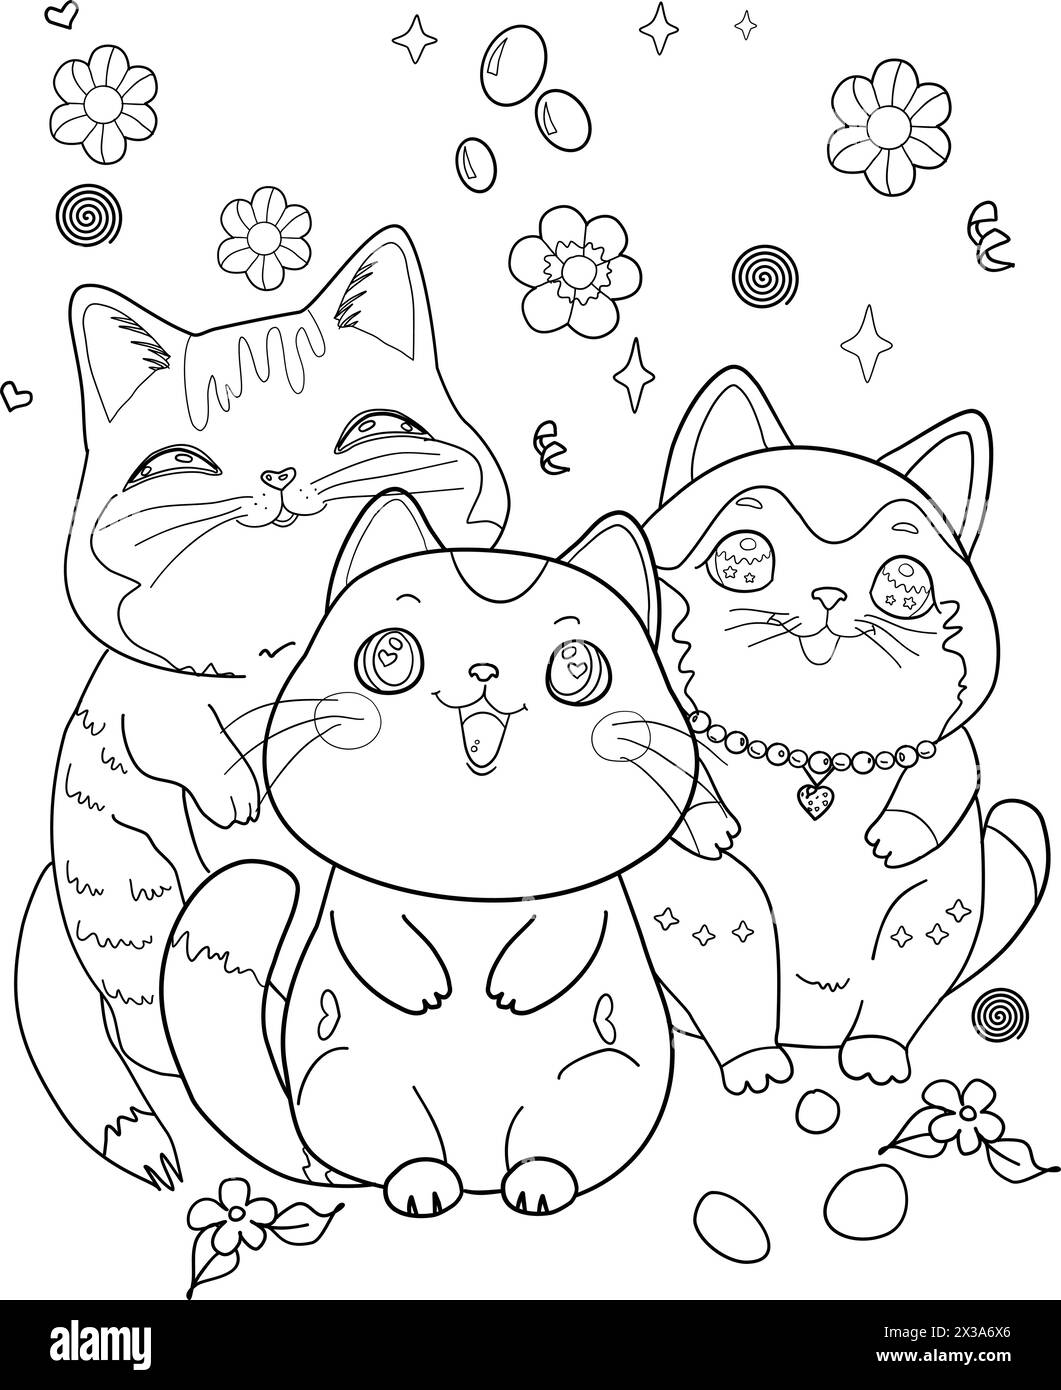 cats cartoon ,kawaii coloring page for kids and adult Stock Vector